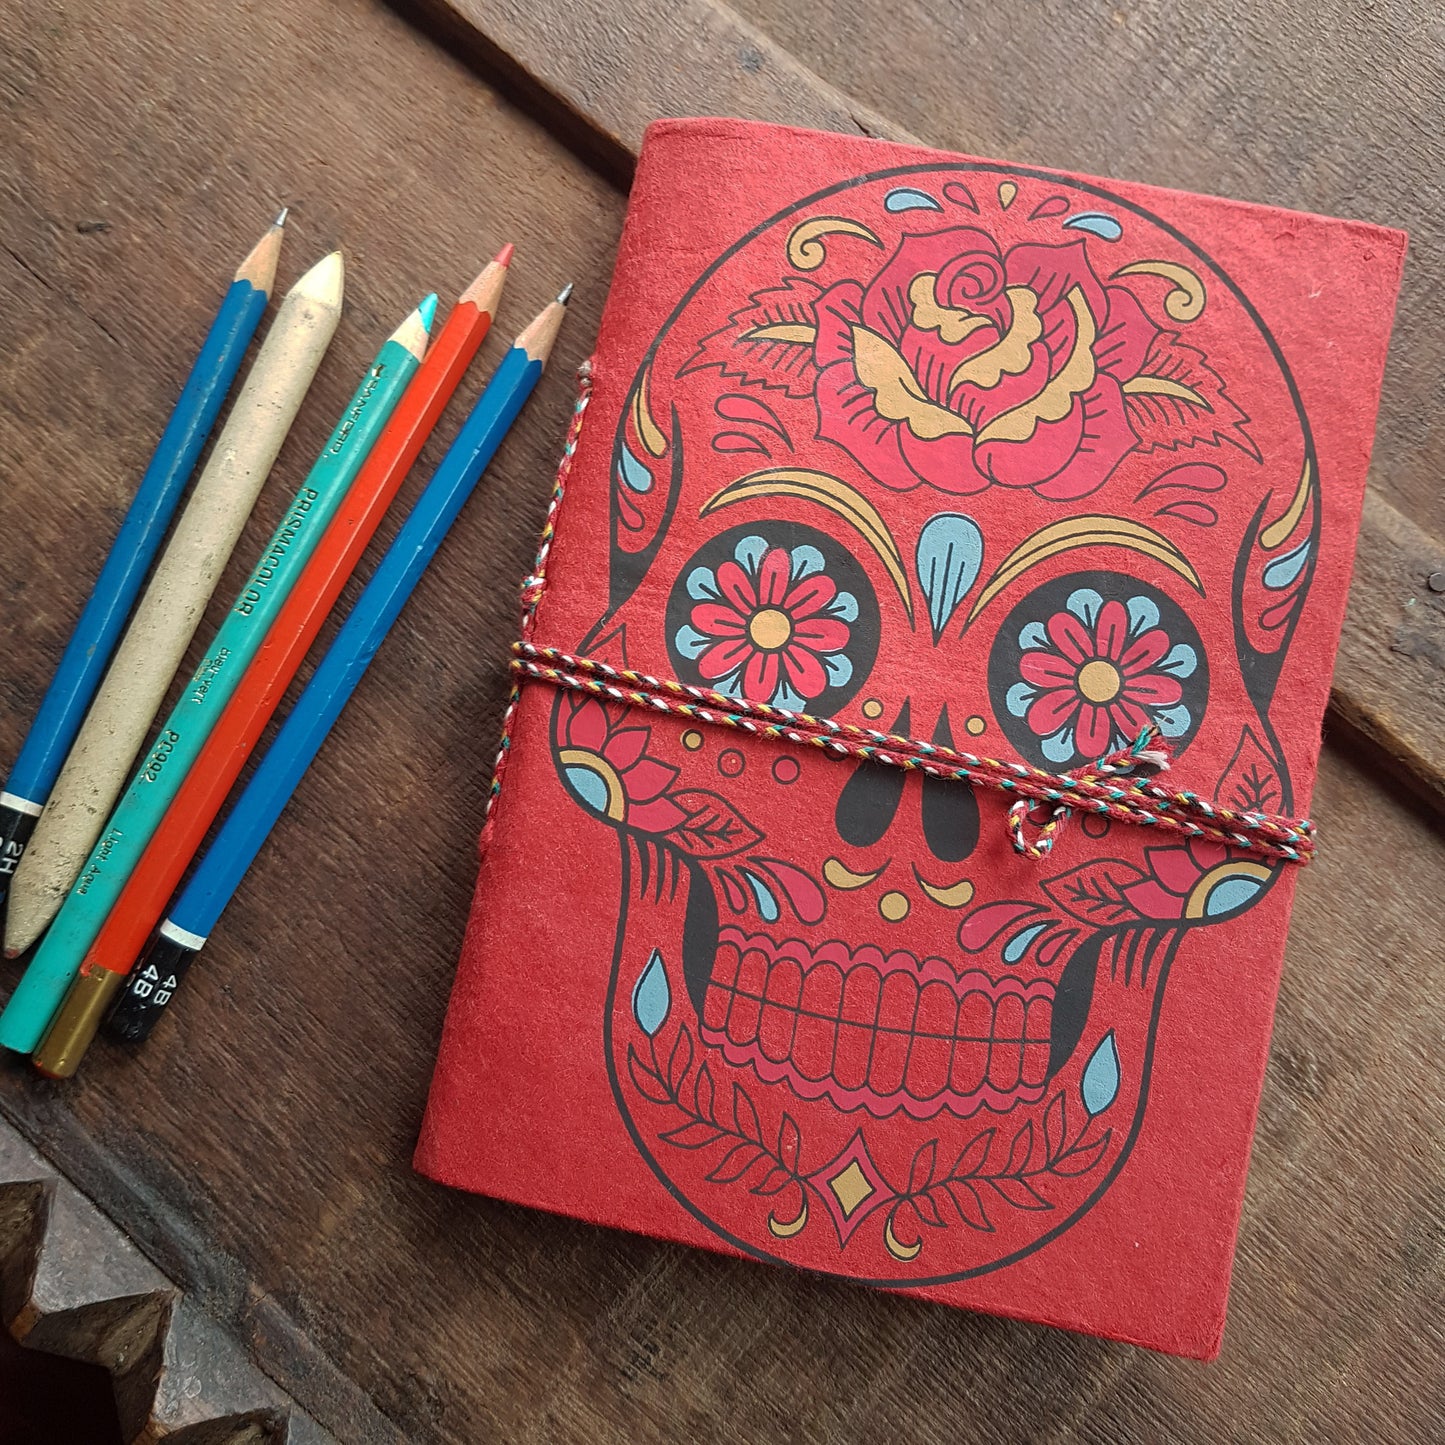 Red skull sketchbook jotter journal 5 by 7 inches with blank artisan paper pages. Colorful gothic day of the dead sugarskull design diary in red.